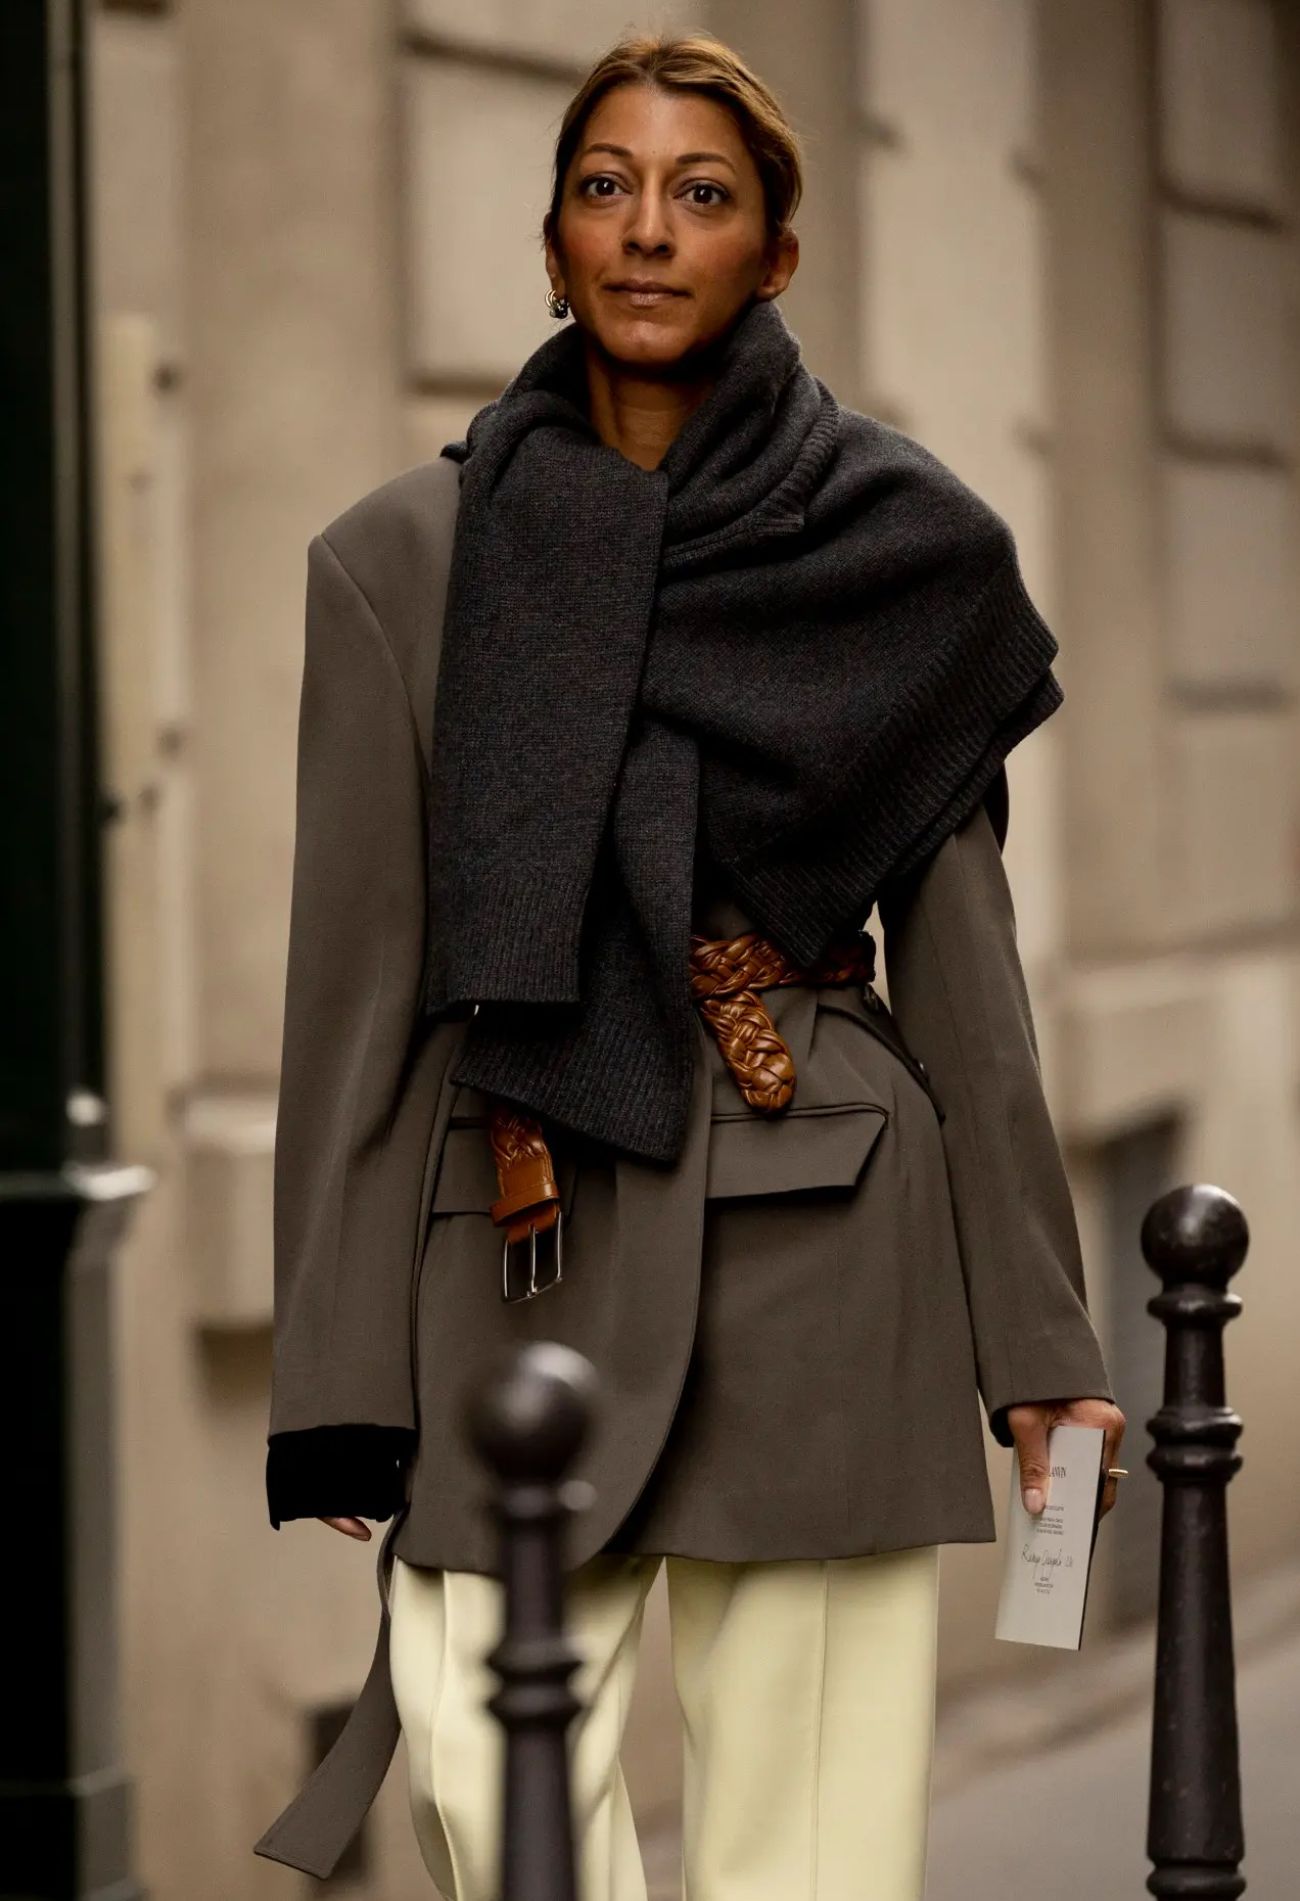 French Style Autumn Layering Sweater Over Belted Blazer Paris Fashion Week